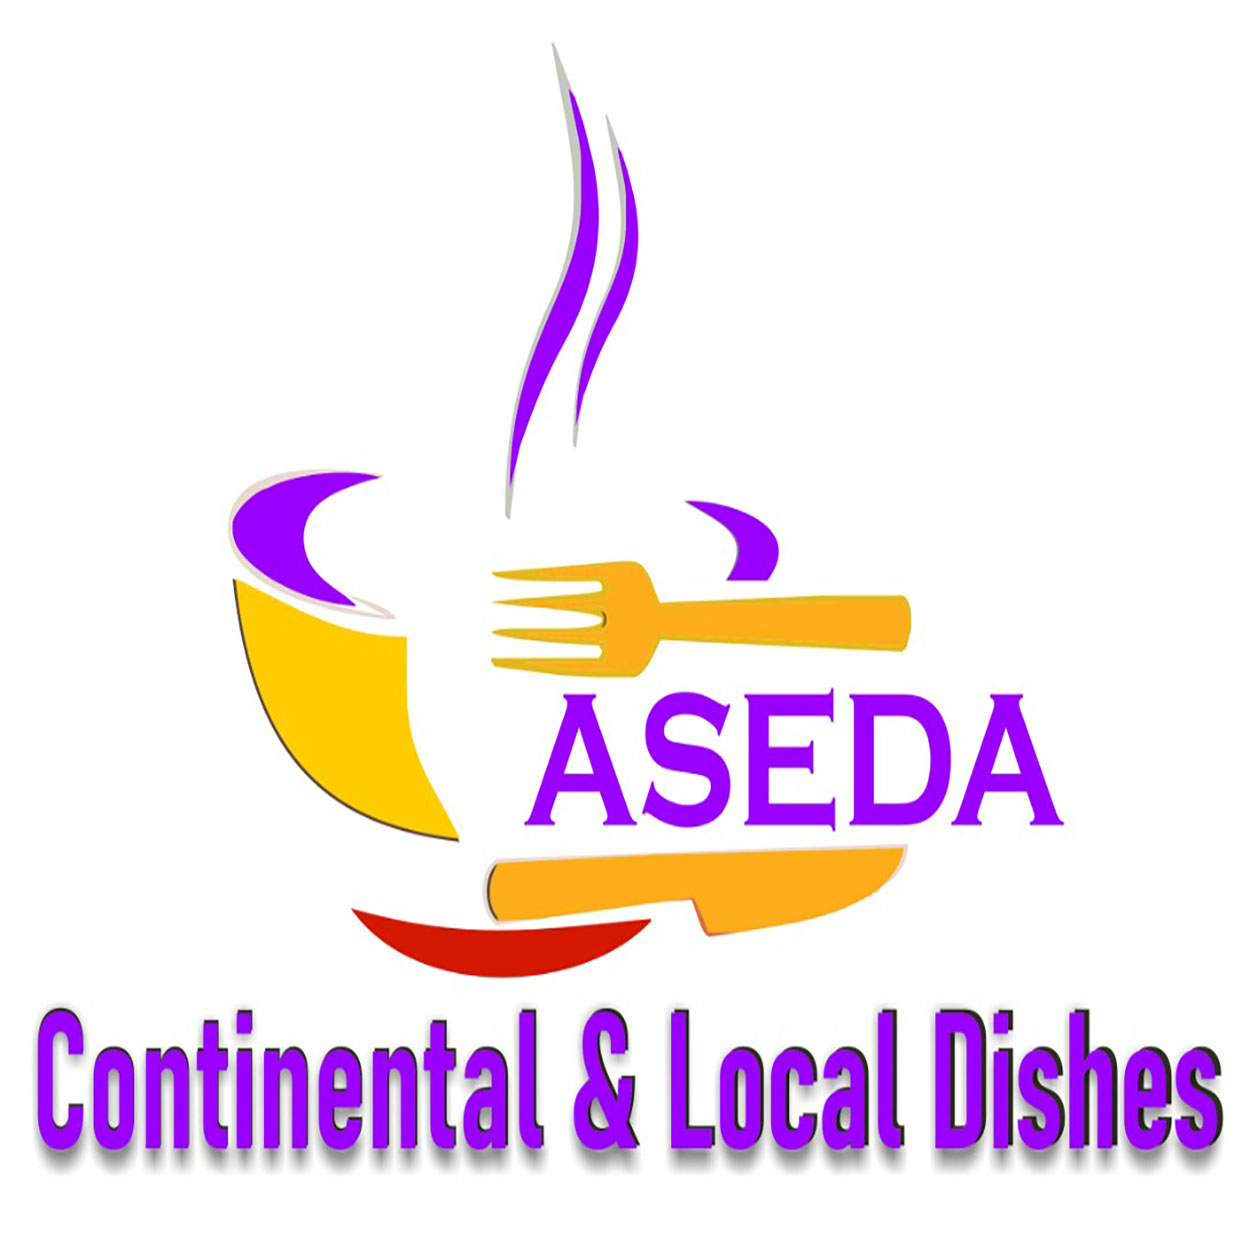 aseda-continental-local-dishes